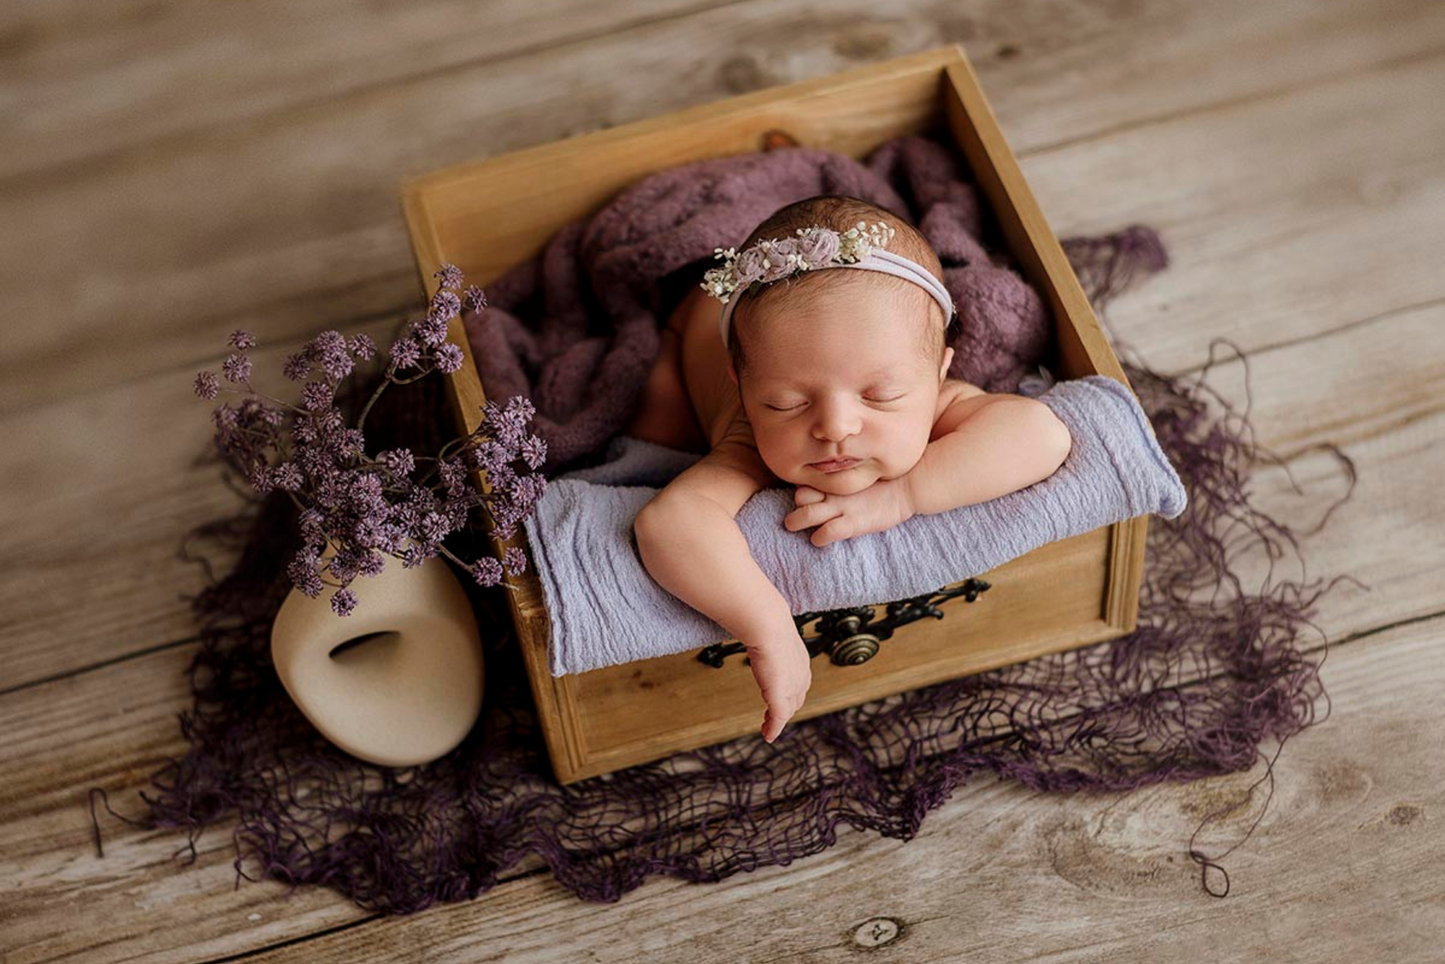 Rustic wooden box prop adorned with an ornate black latch, accompanied by delicate white fluff and a trailing green plant, set against a textured white backdrop. Perfect for newborn photography sessions. Available at Newborn Studio Props.